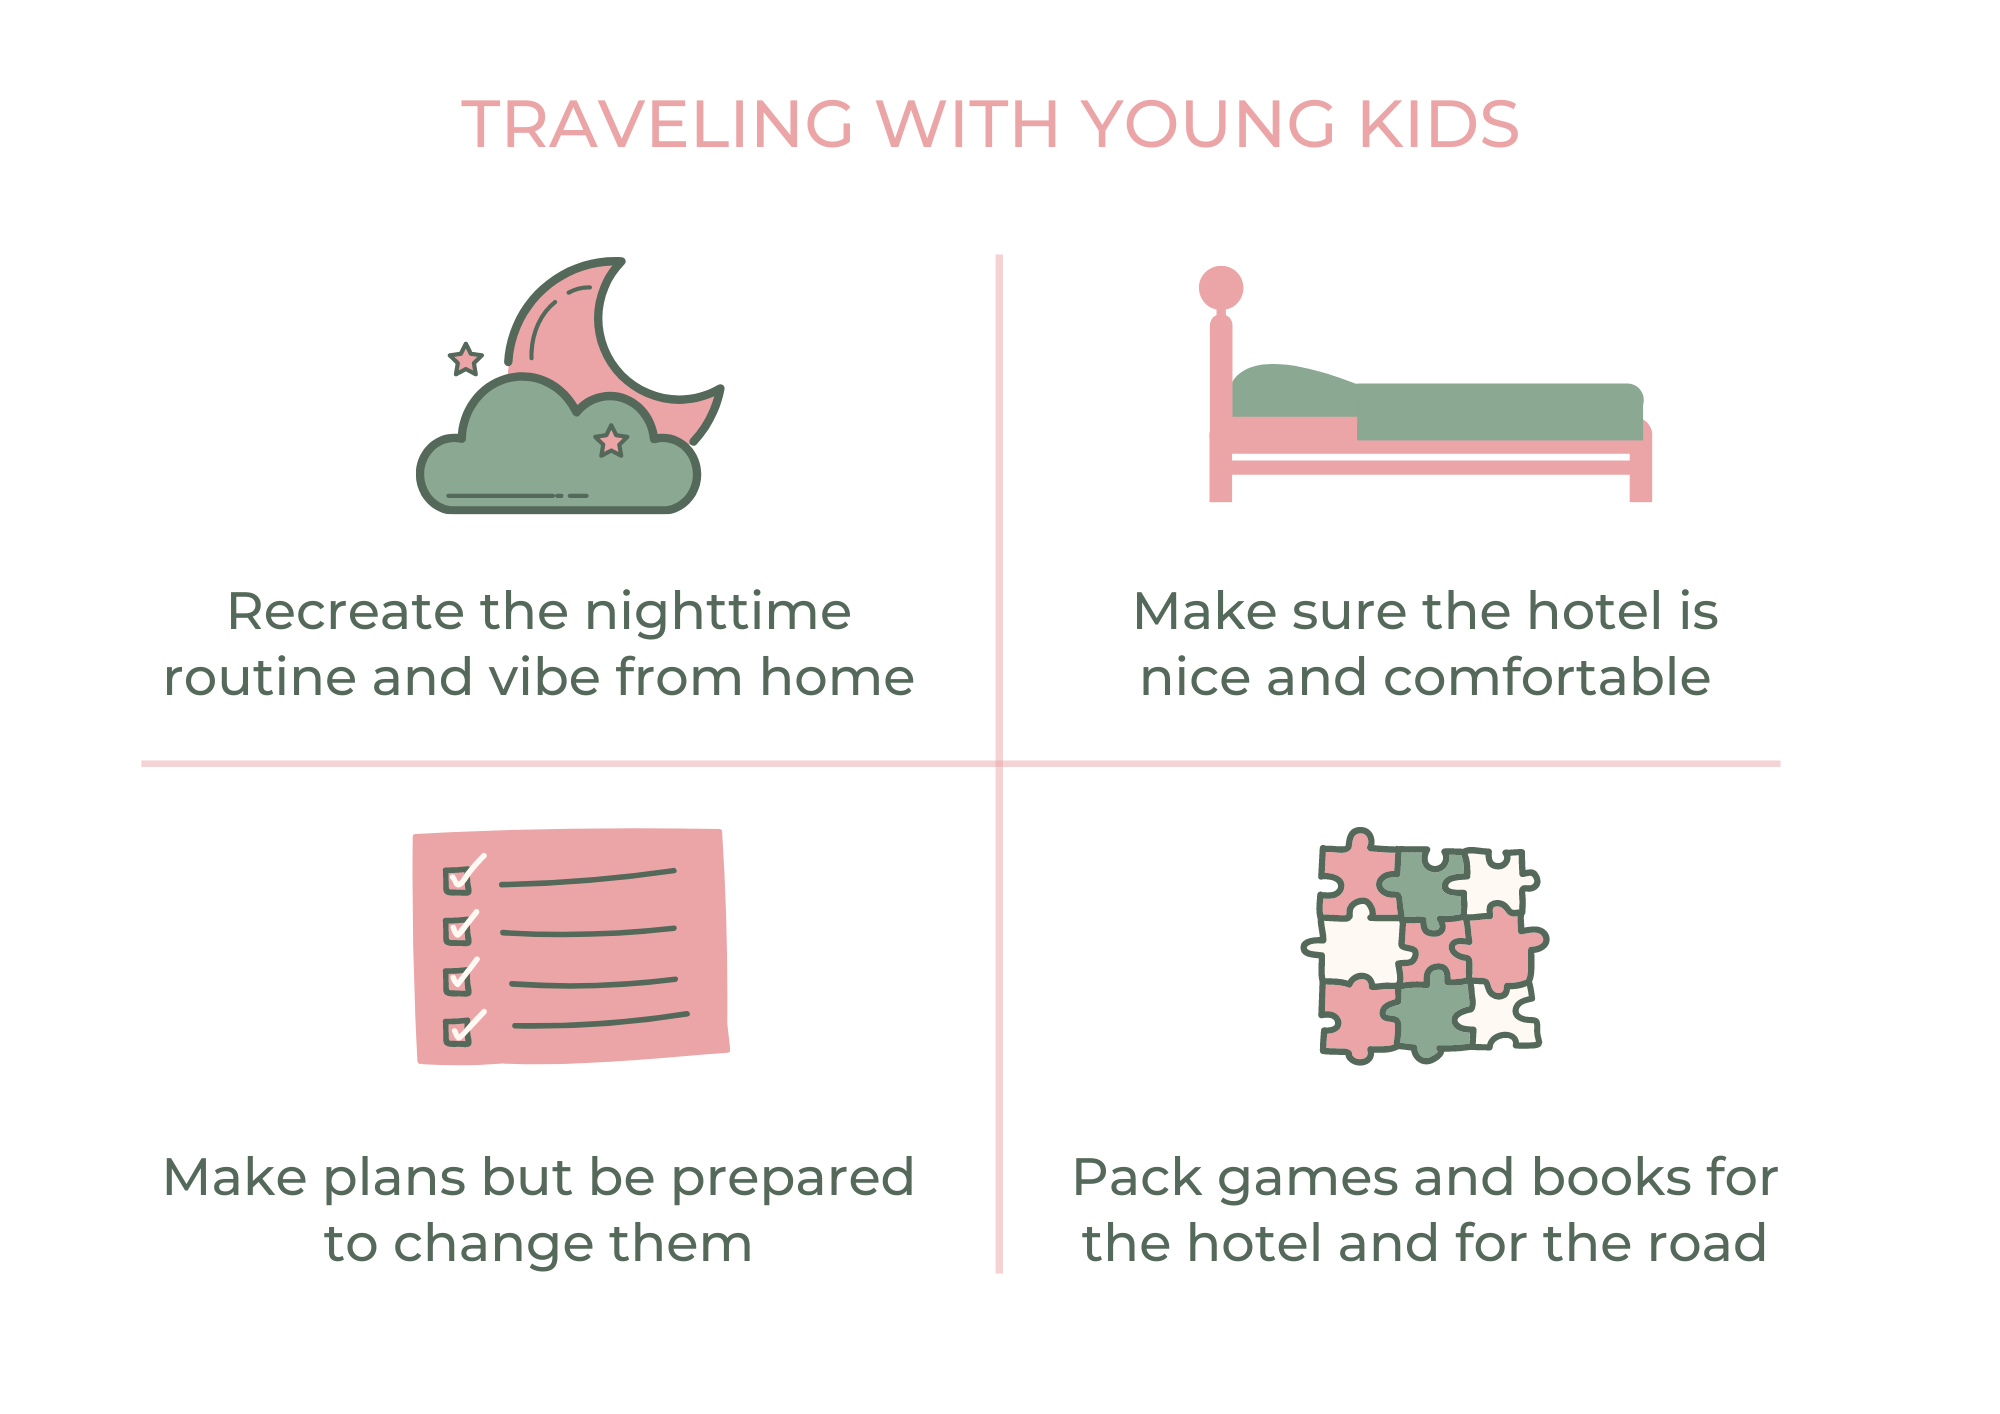 Four tips to travel with young kids